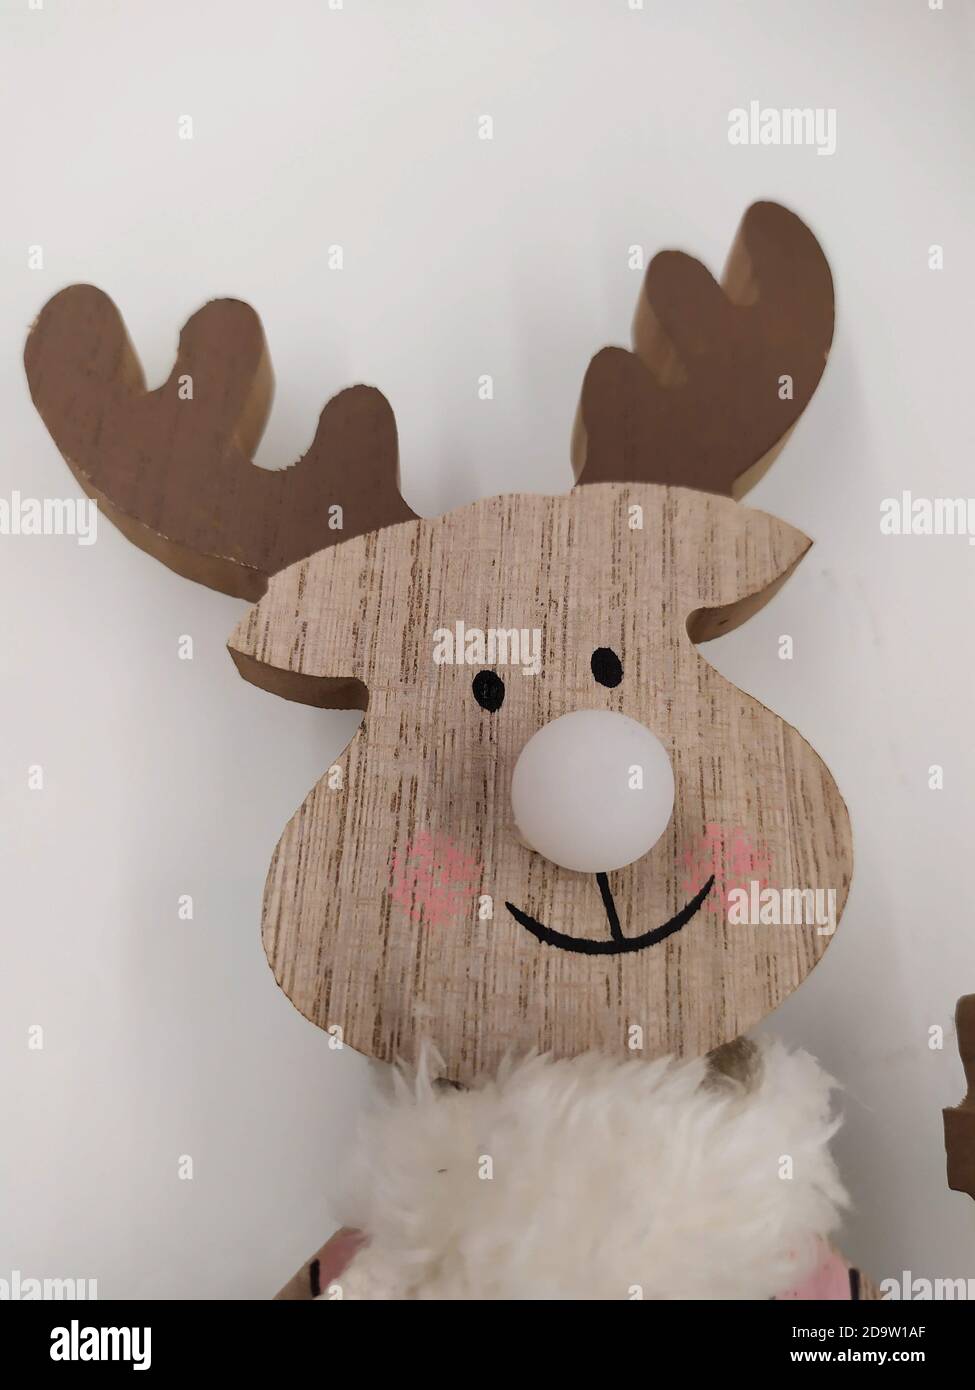 Festive decorations in the covid period of Christmas 2020, reindeer in wood Stock Photo